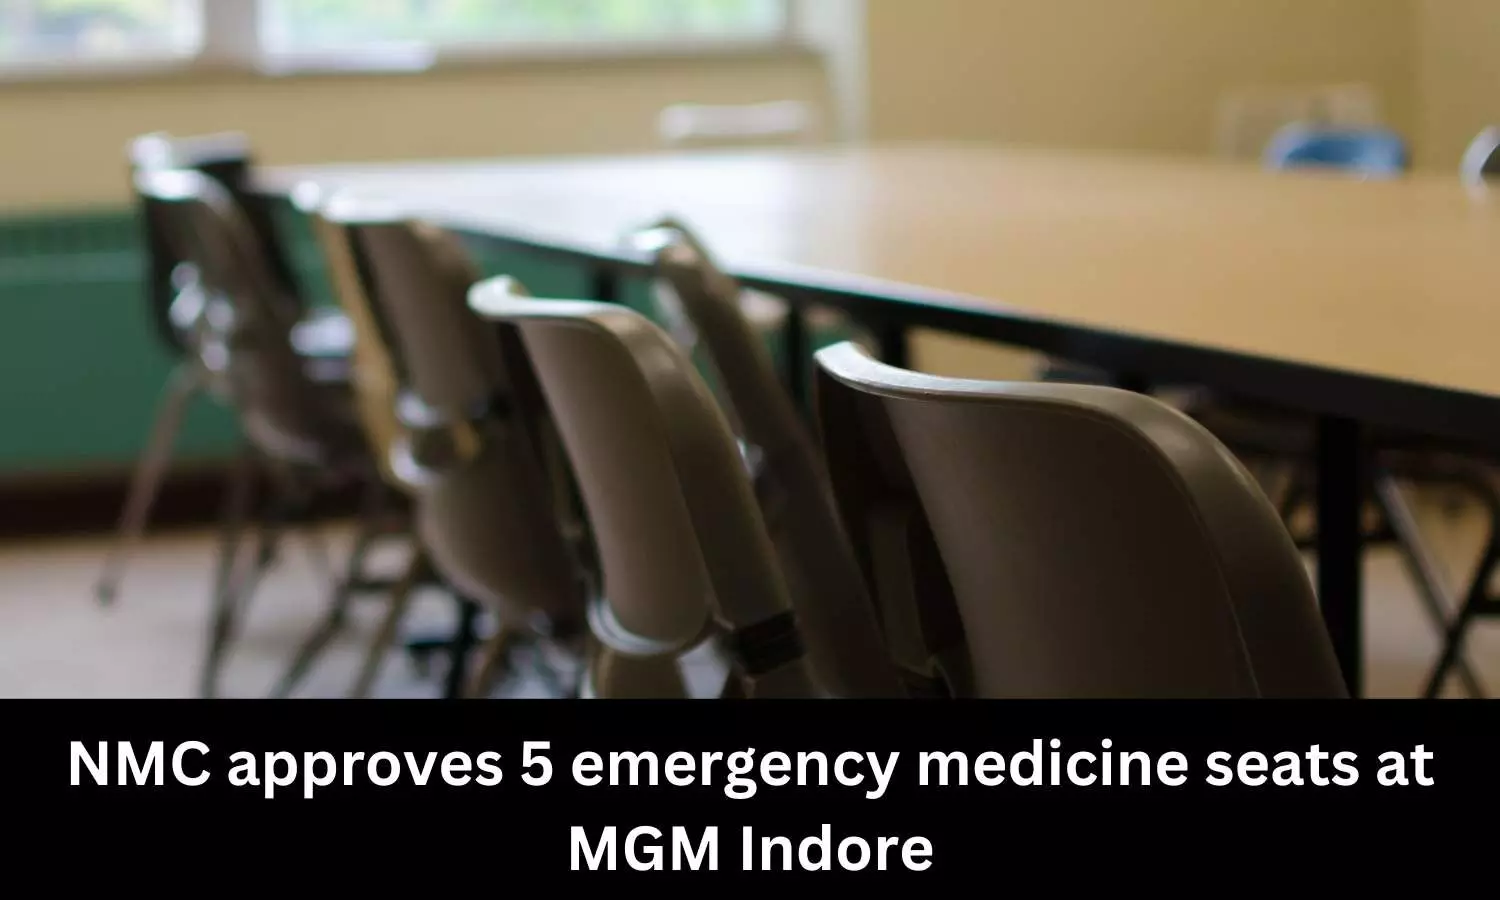 MGM Indore gets NMC nod for 5 Emergency Medicine Seats